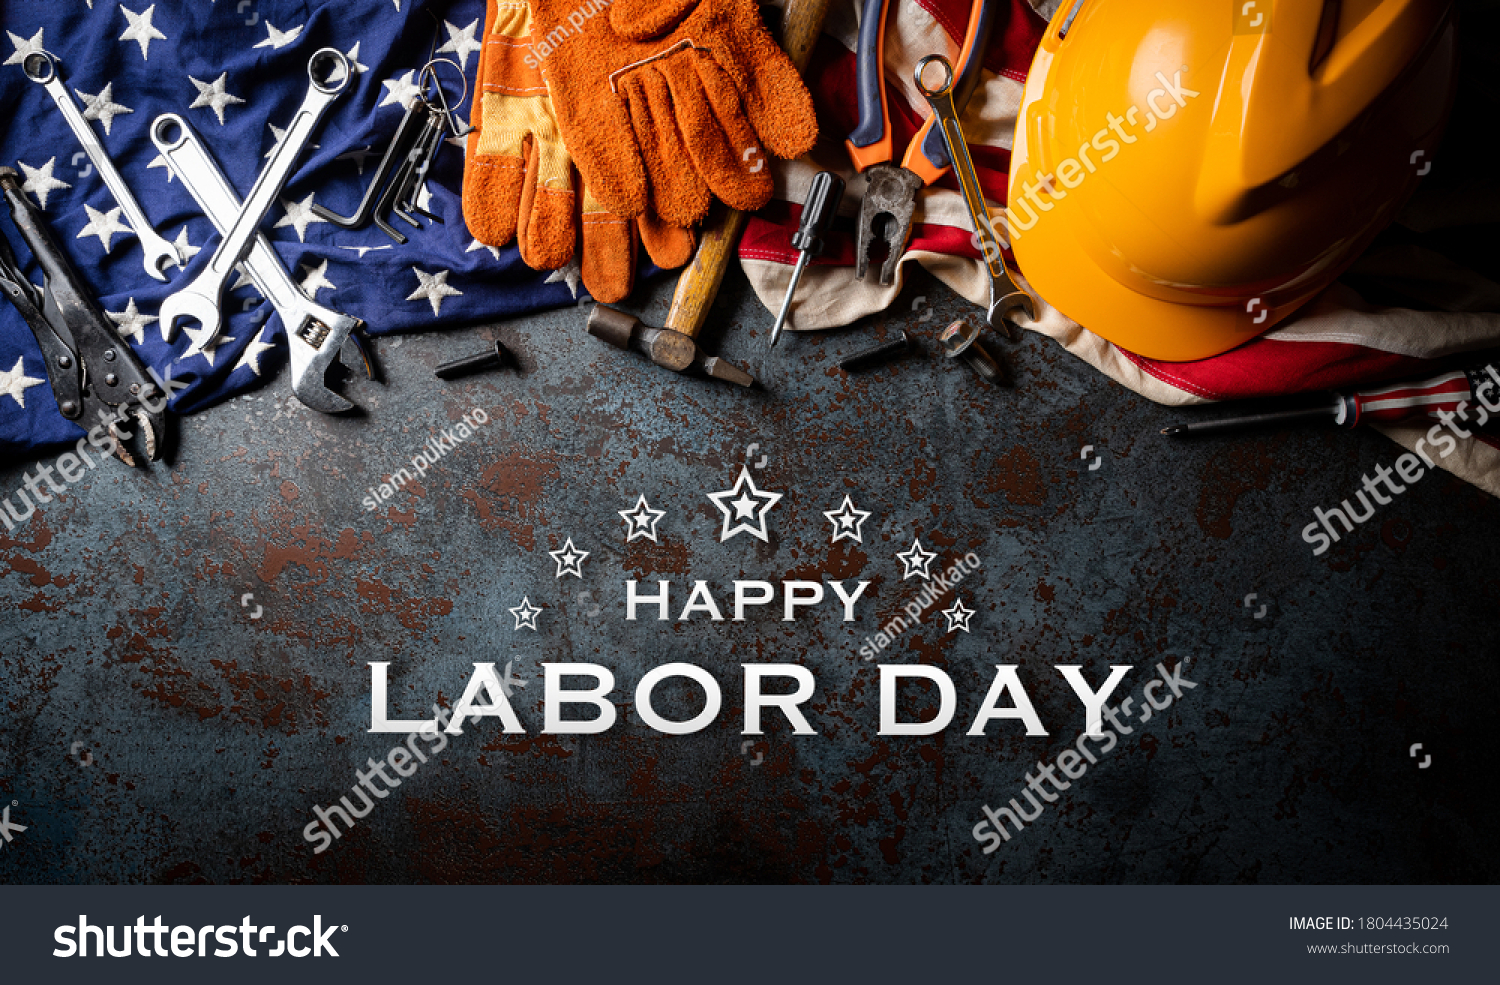 Happy Labor day concept. American flag with different construction tools on dark stone background, with Happy Labor Day text. #1804435024